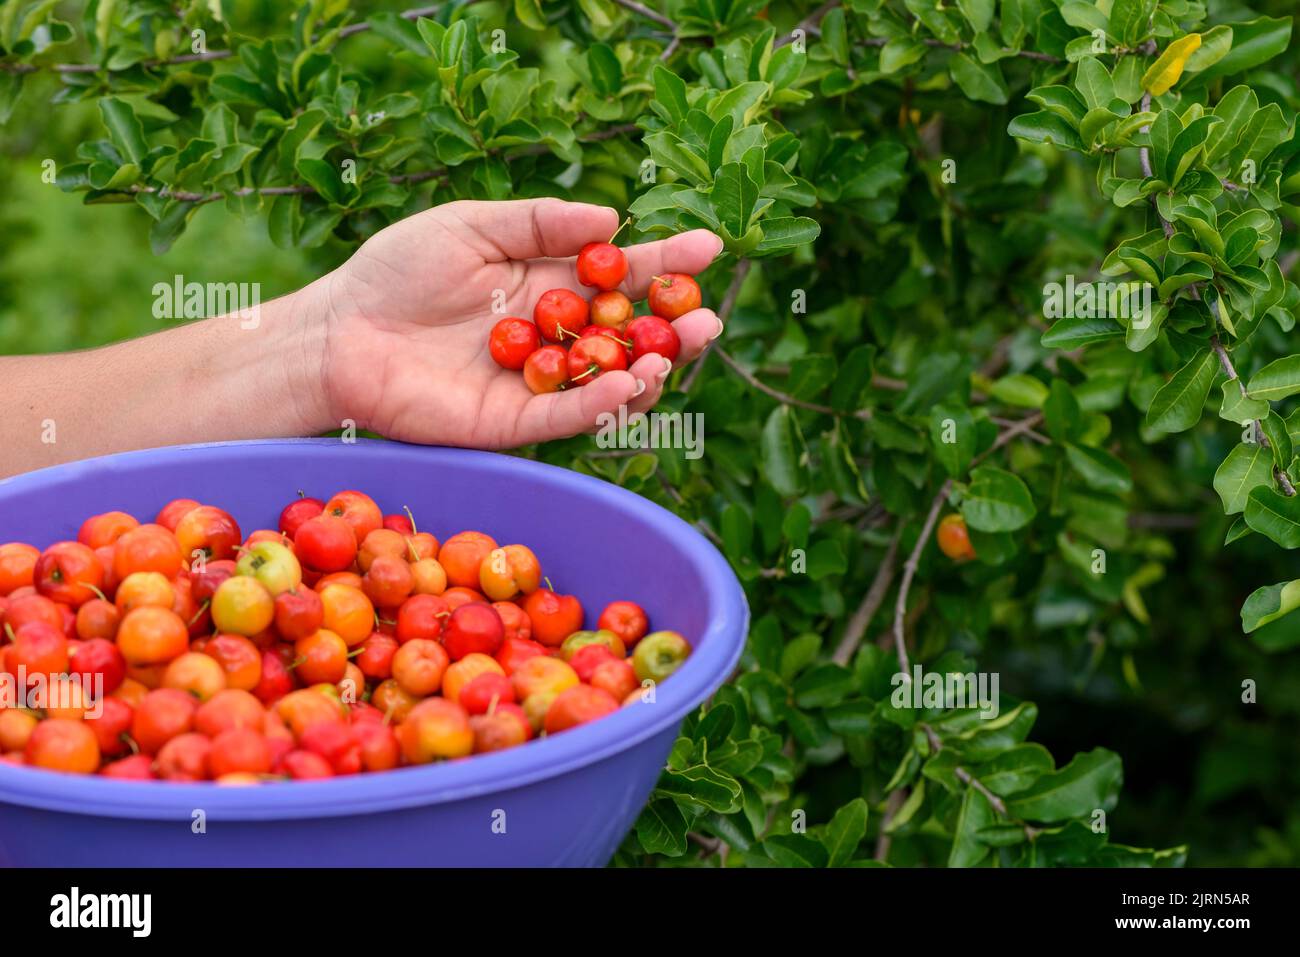 Acerola fruit being picked by hand and placed in a purple plastic bowl. Stock Photo